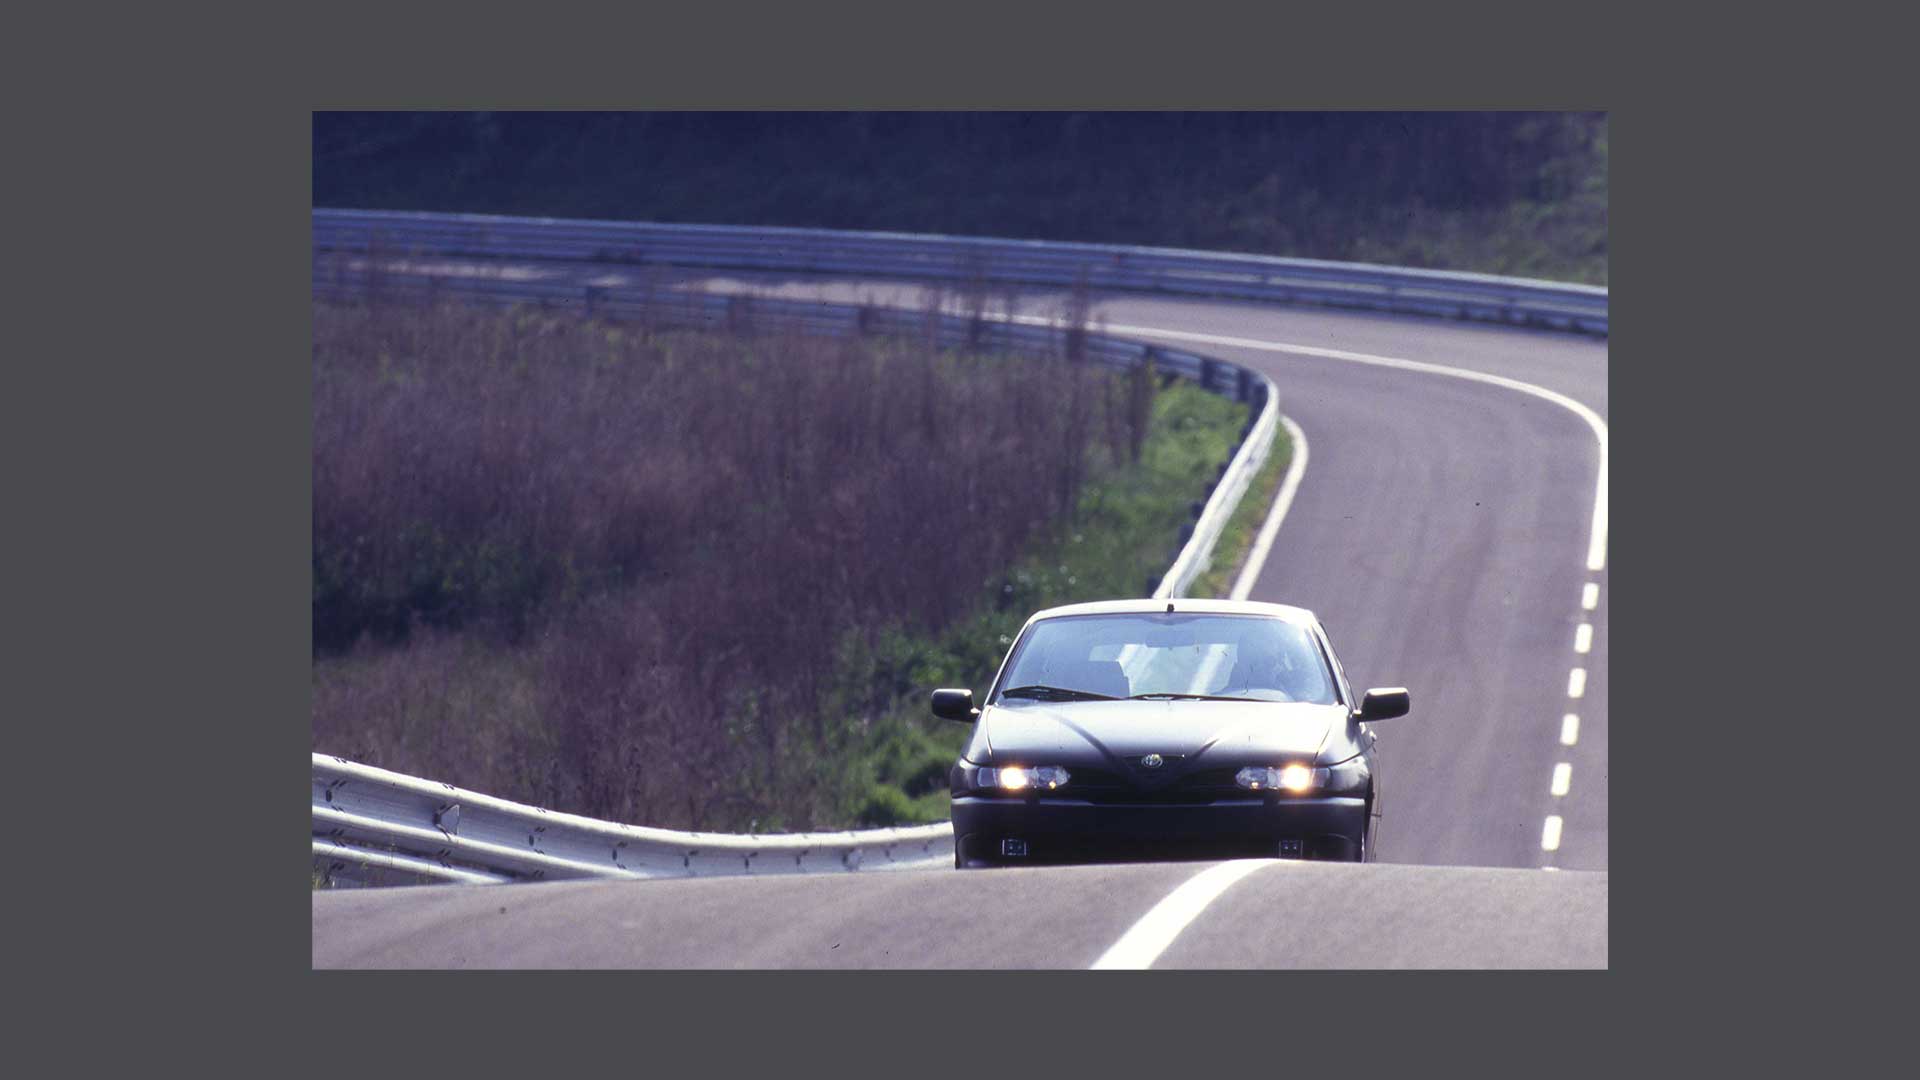 Photo of a car on an uphill track